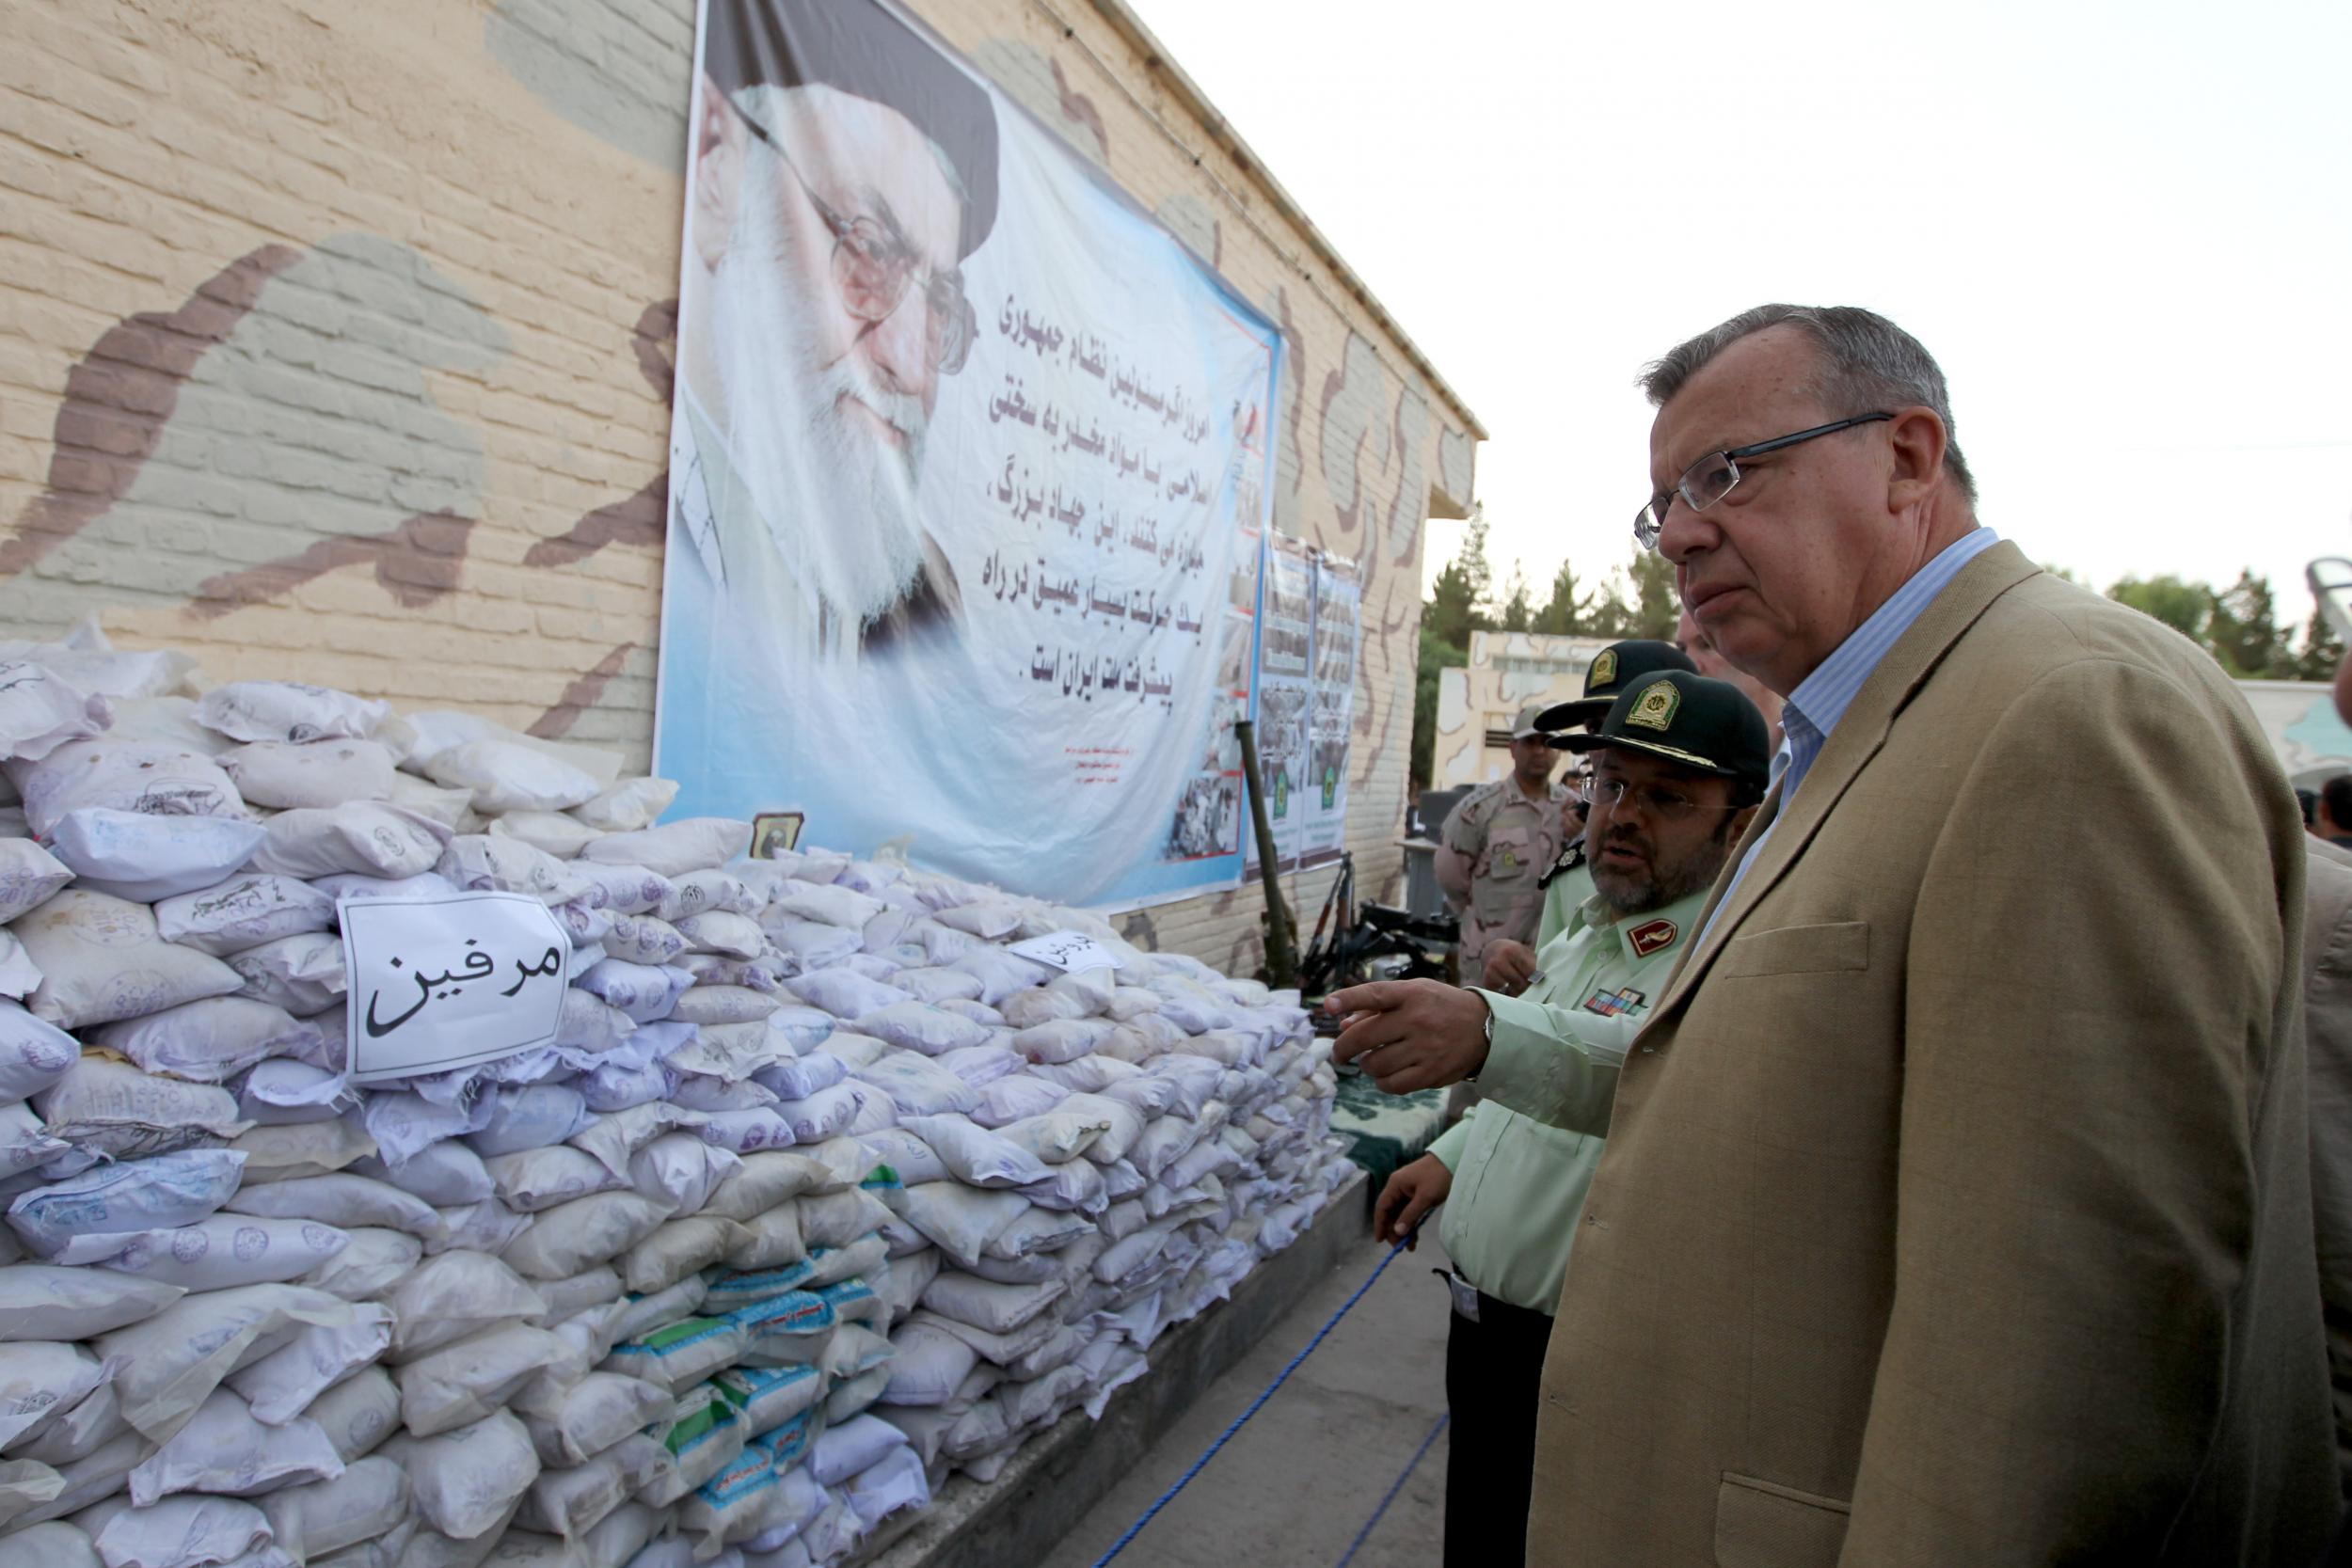 Executive director of the UN office on drugs and crime (UNODC) Yury Fedotov (R) and Iranian anti-narcotics police chief Hamidreza Housein Abadi look at bags of Afghan-made morphine on display during a media tour in the southeastern city of Zahedan, on 19 July 2011